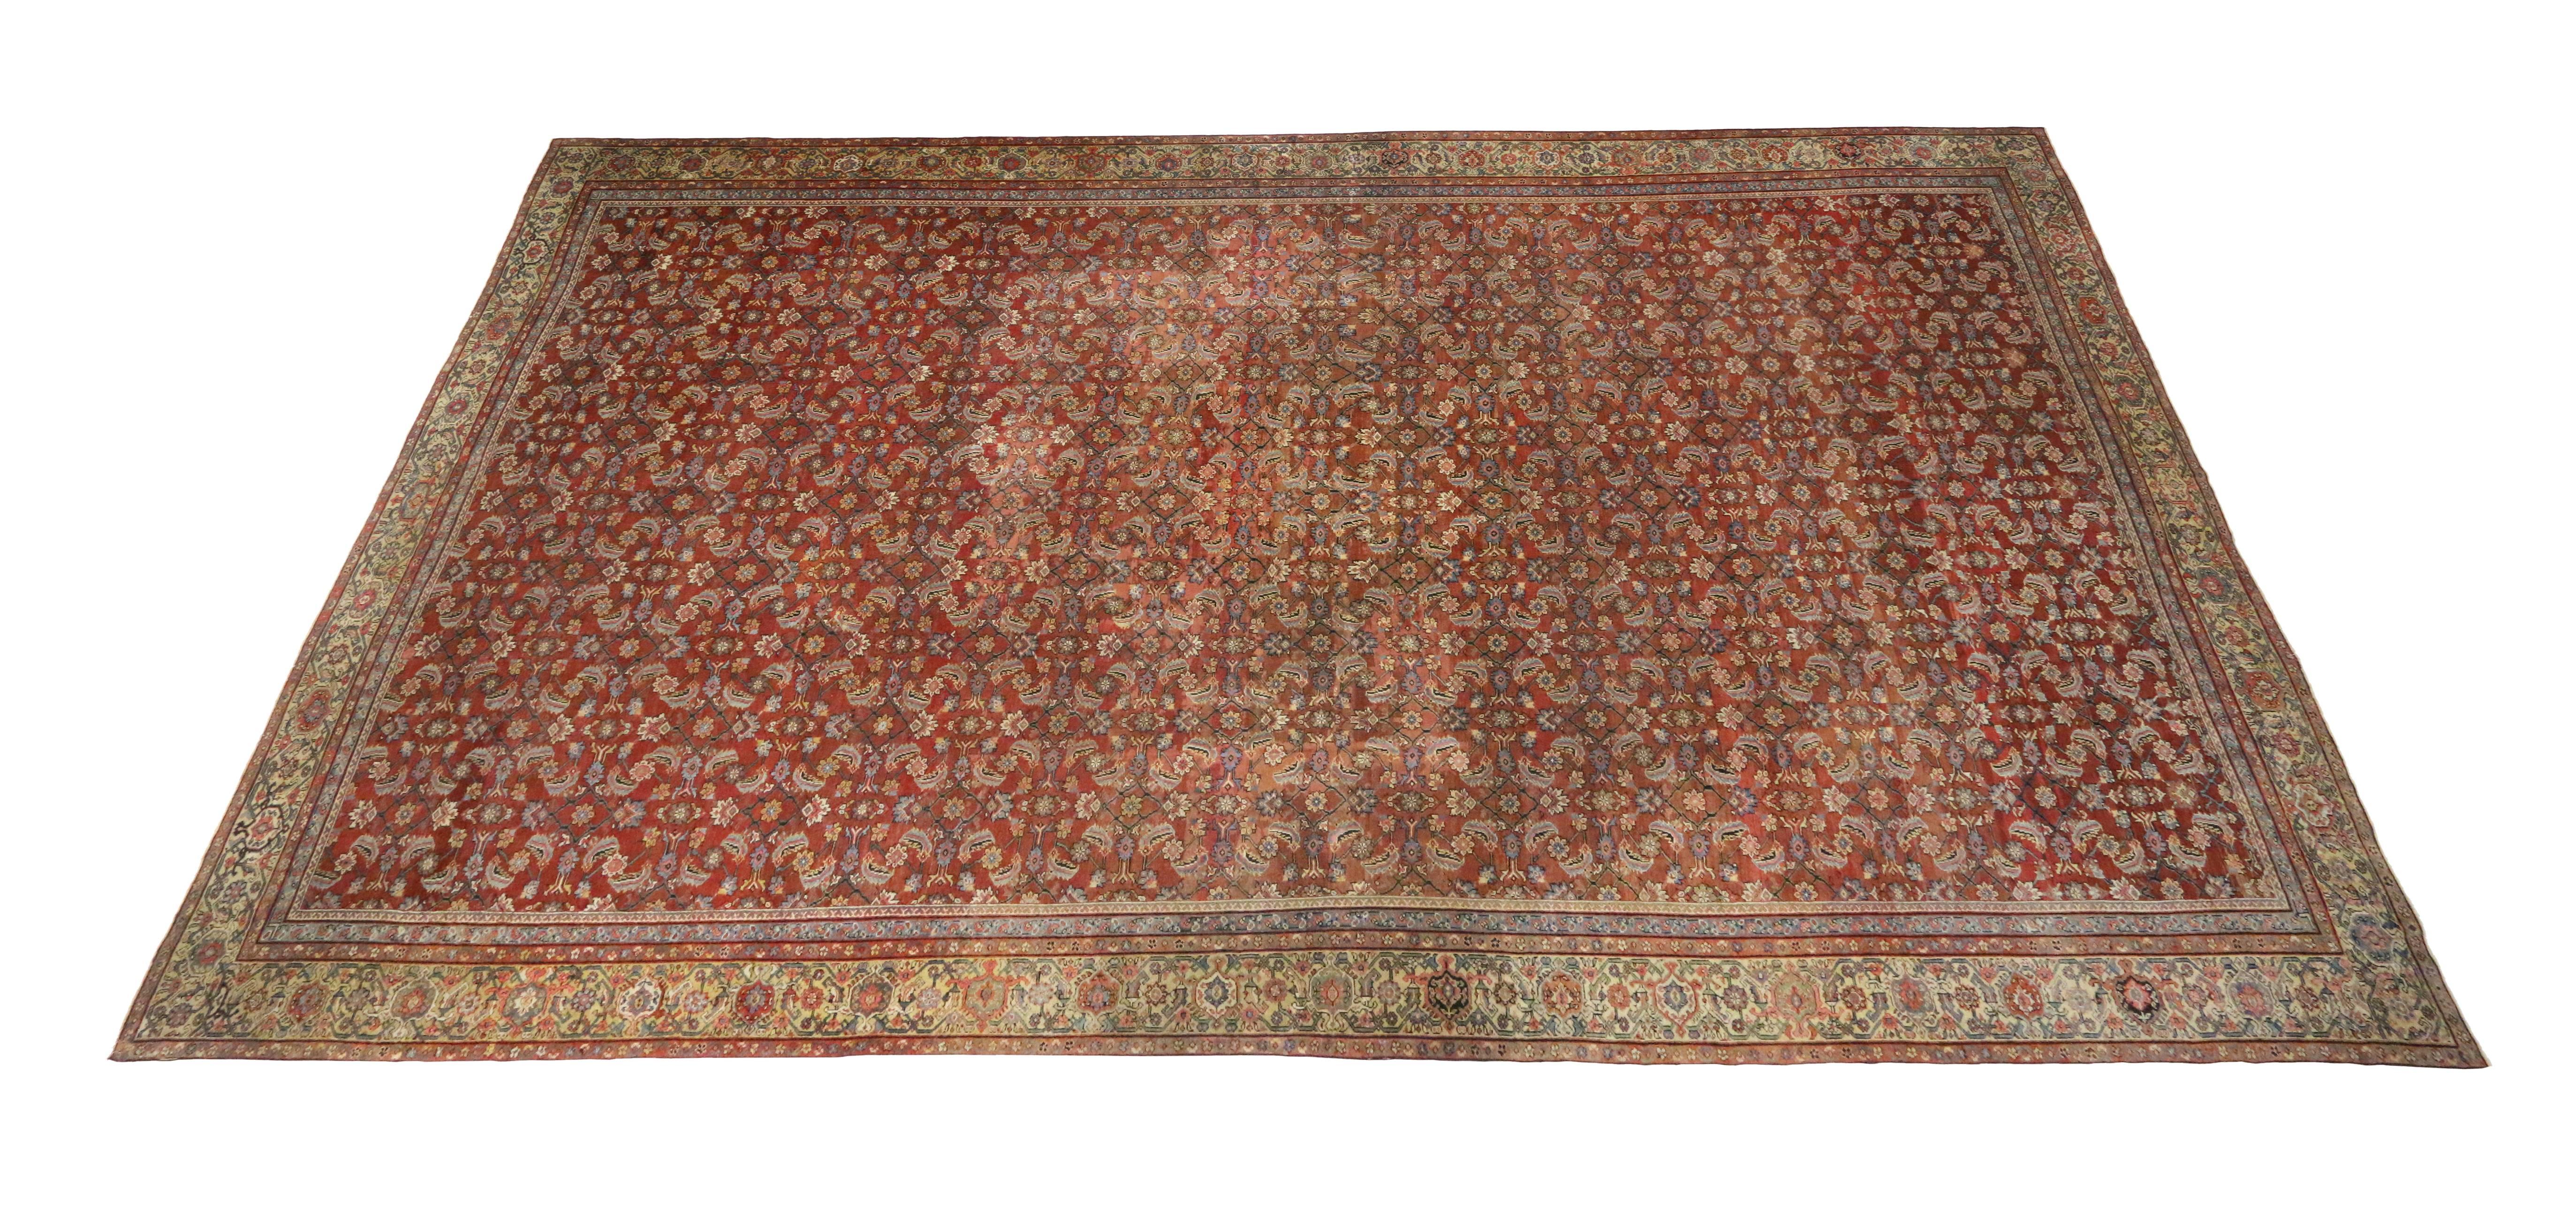 1880s Oversized Antique Persian Farahan Rug, Hotel Lobby Size Carpet In Good Condition For Sale In Dallas, TX